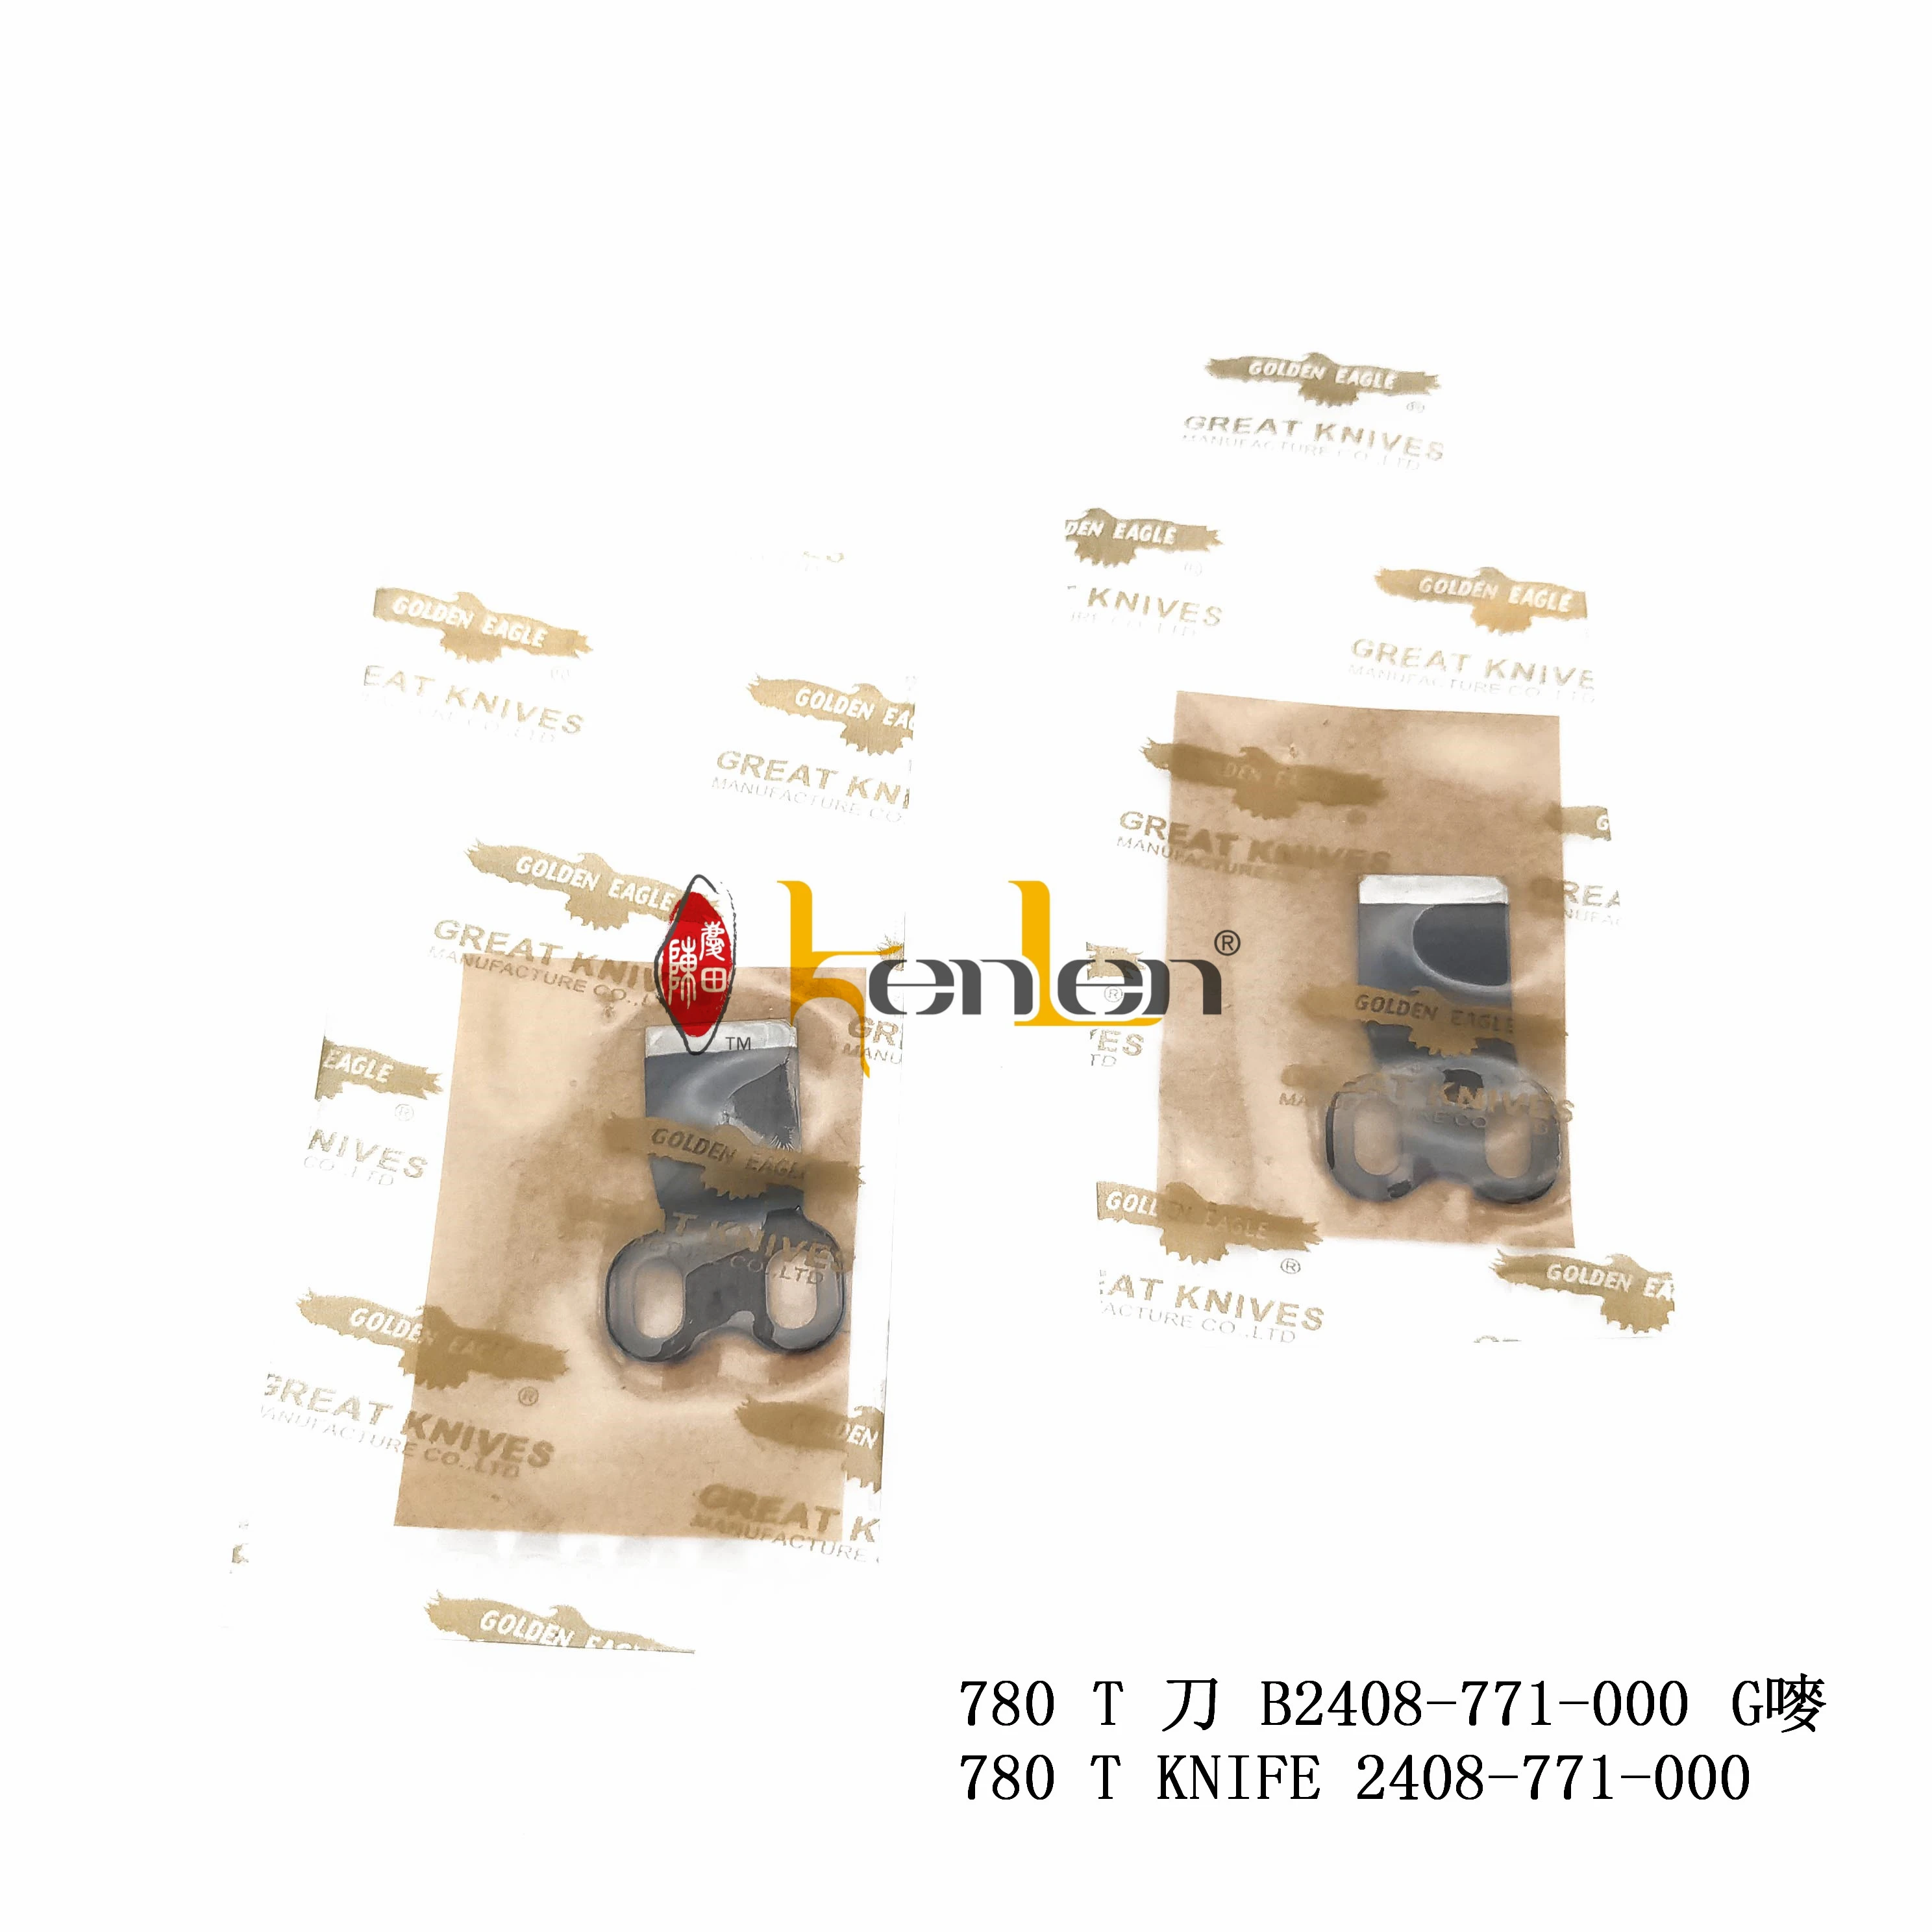 BEST SELLING KENLEN Hong Kong Sole Agent GOLDEN EAGLE 780 T Knife 2408-771-000 Industrial Sewing Machine Spare Parts